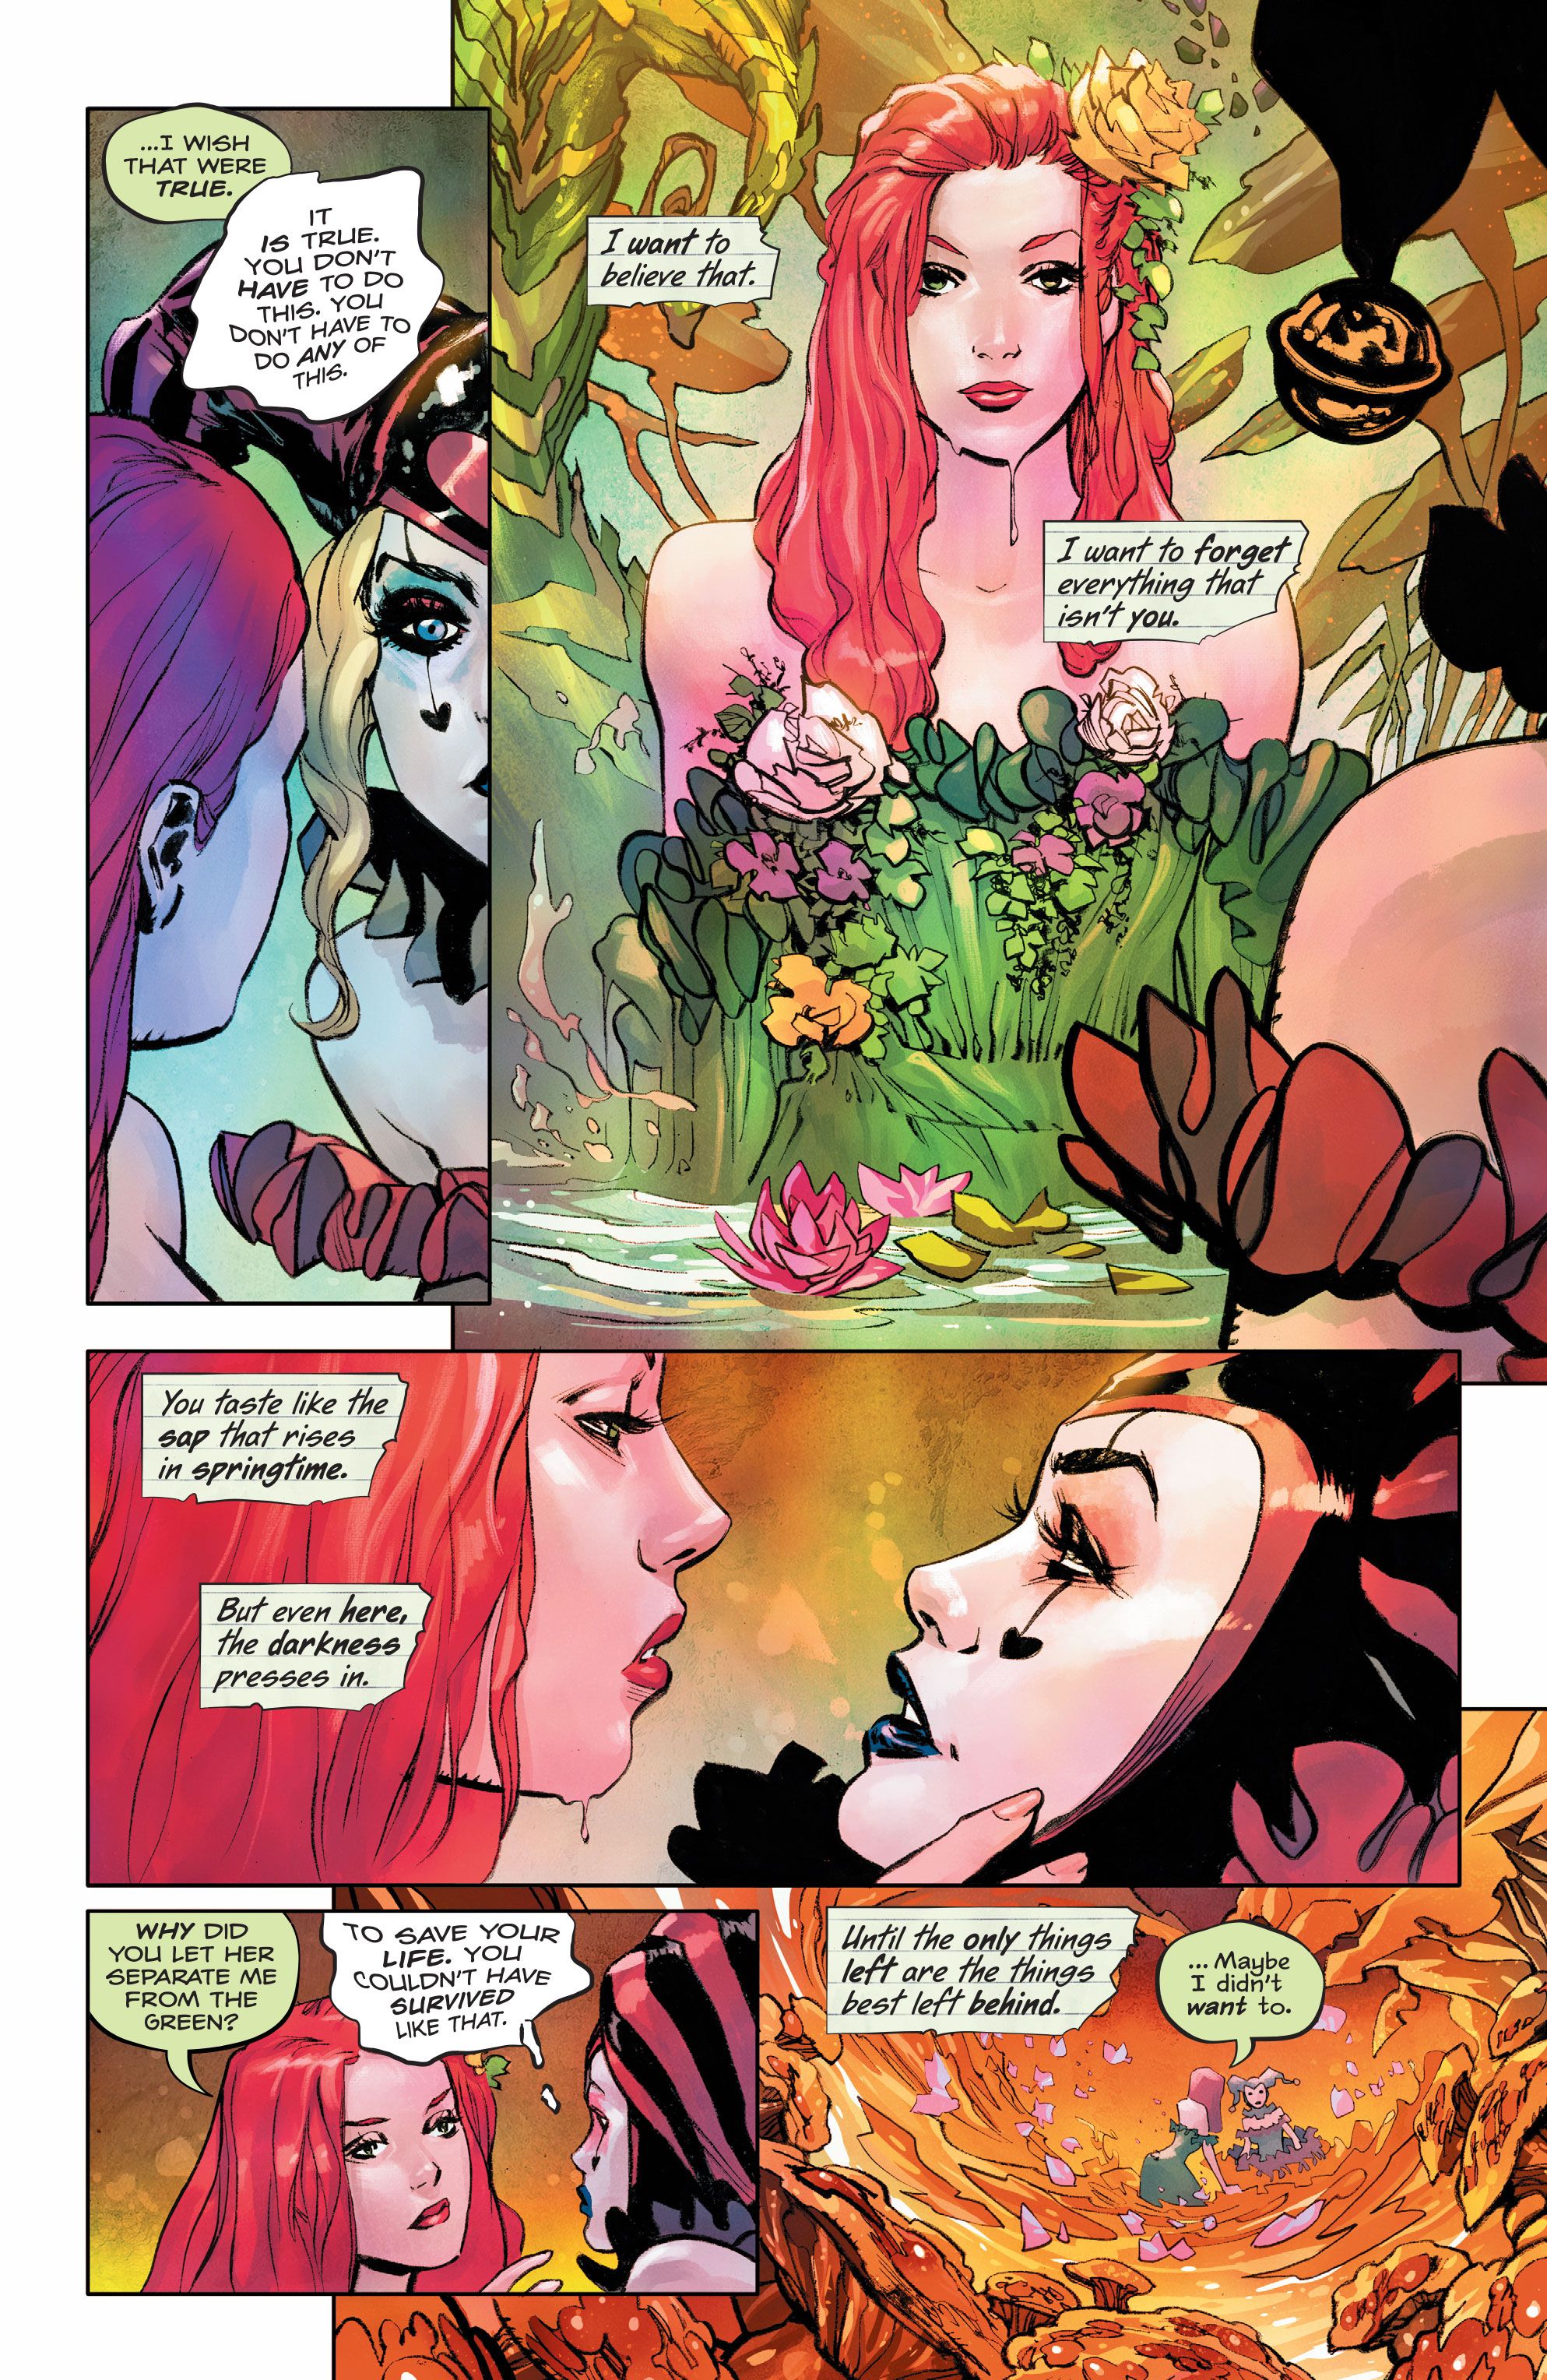 Poison Ivy Preview Page 2022 9